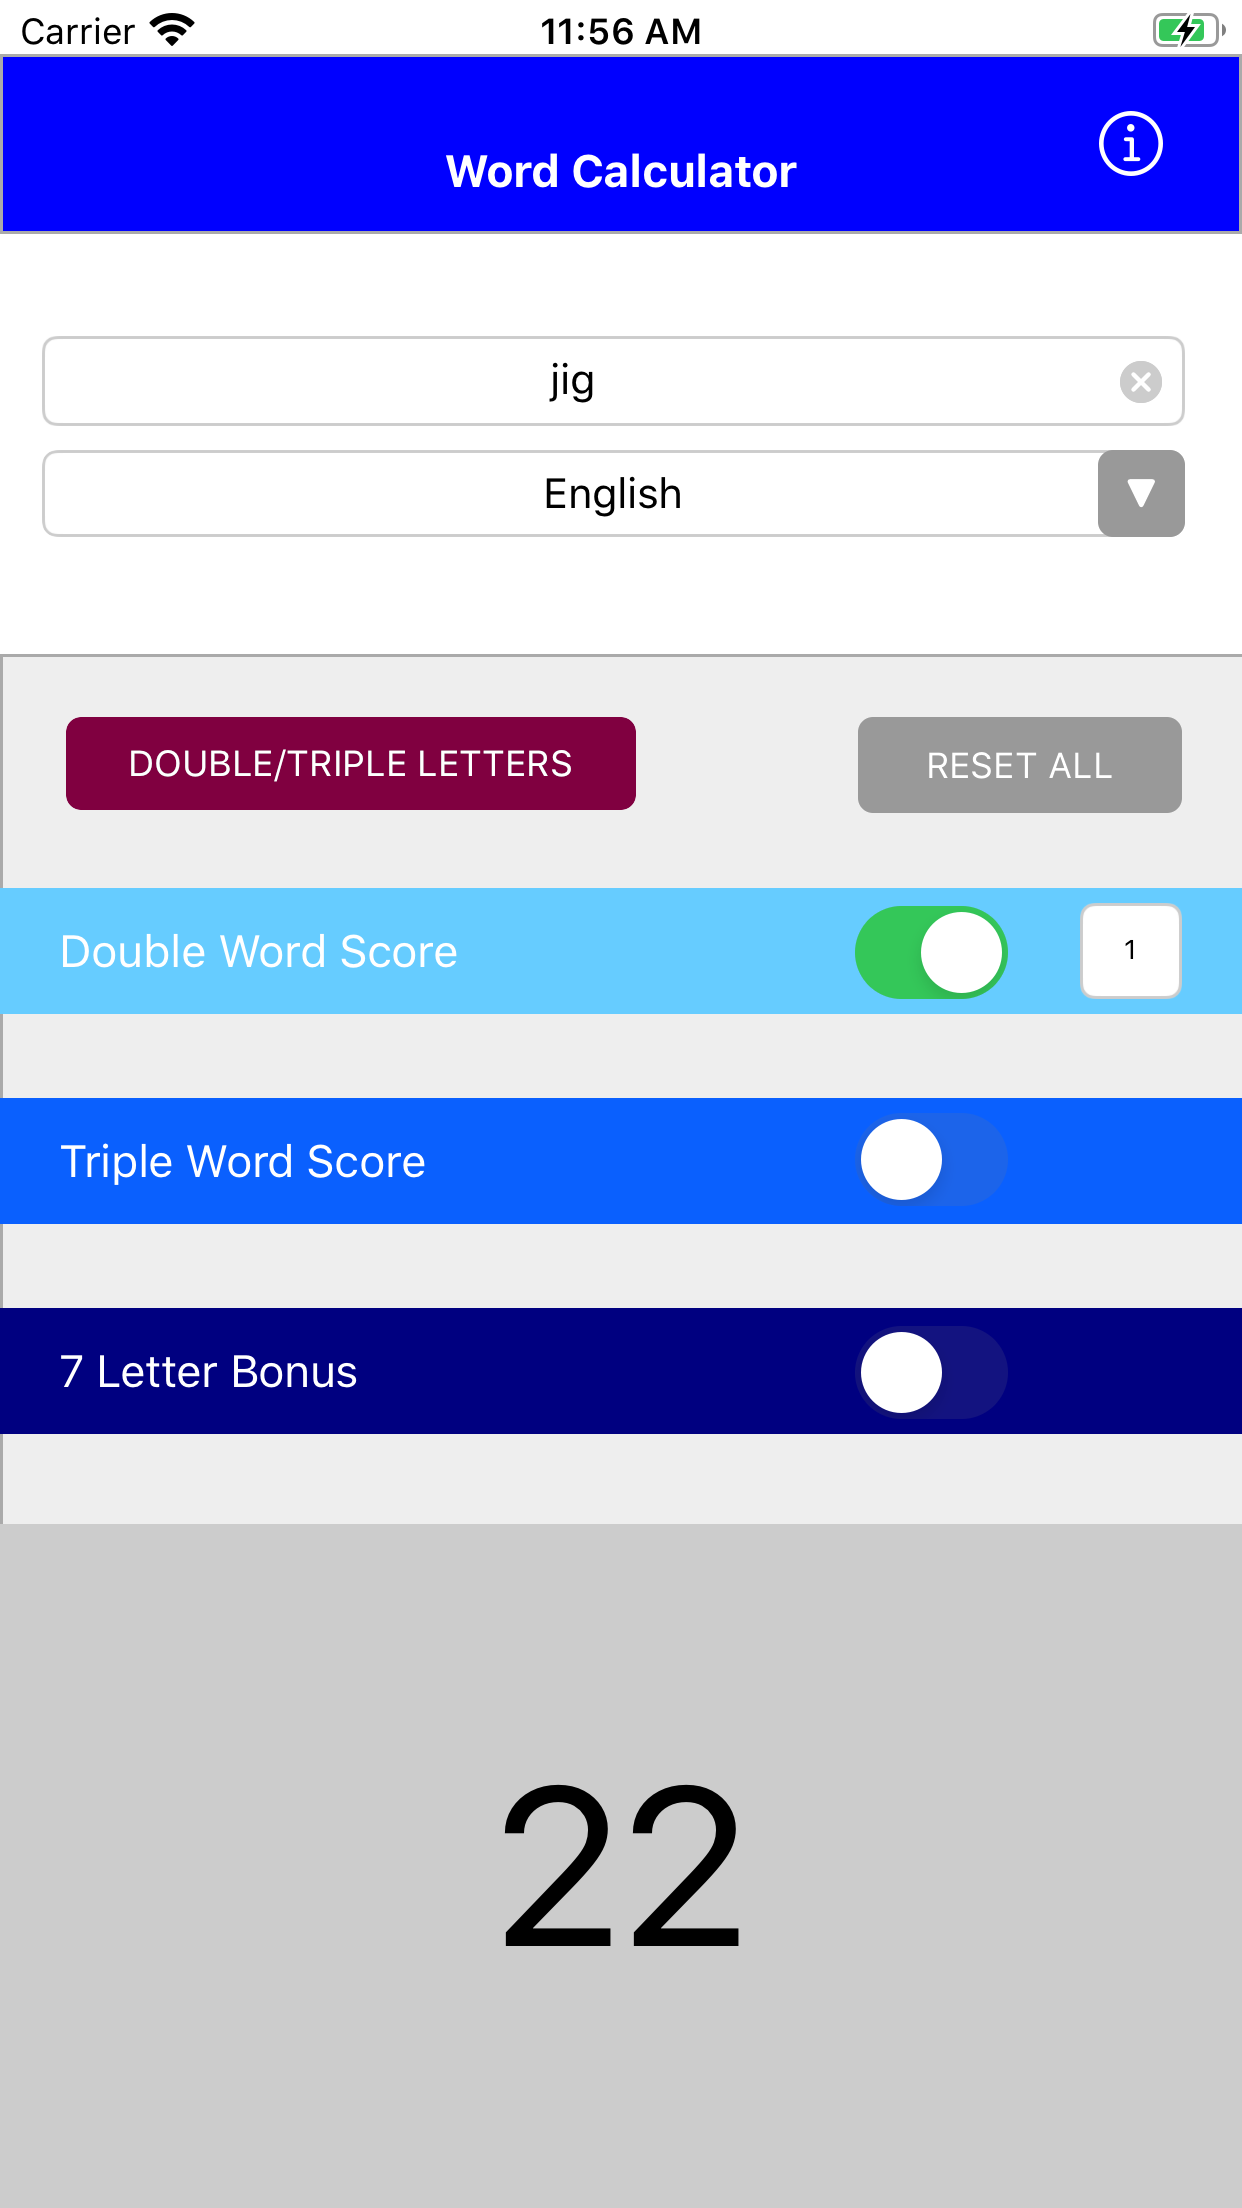 Word Calculator available in App Store